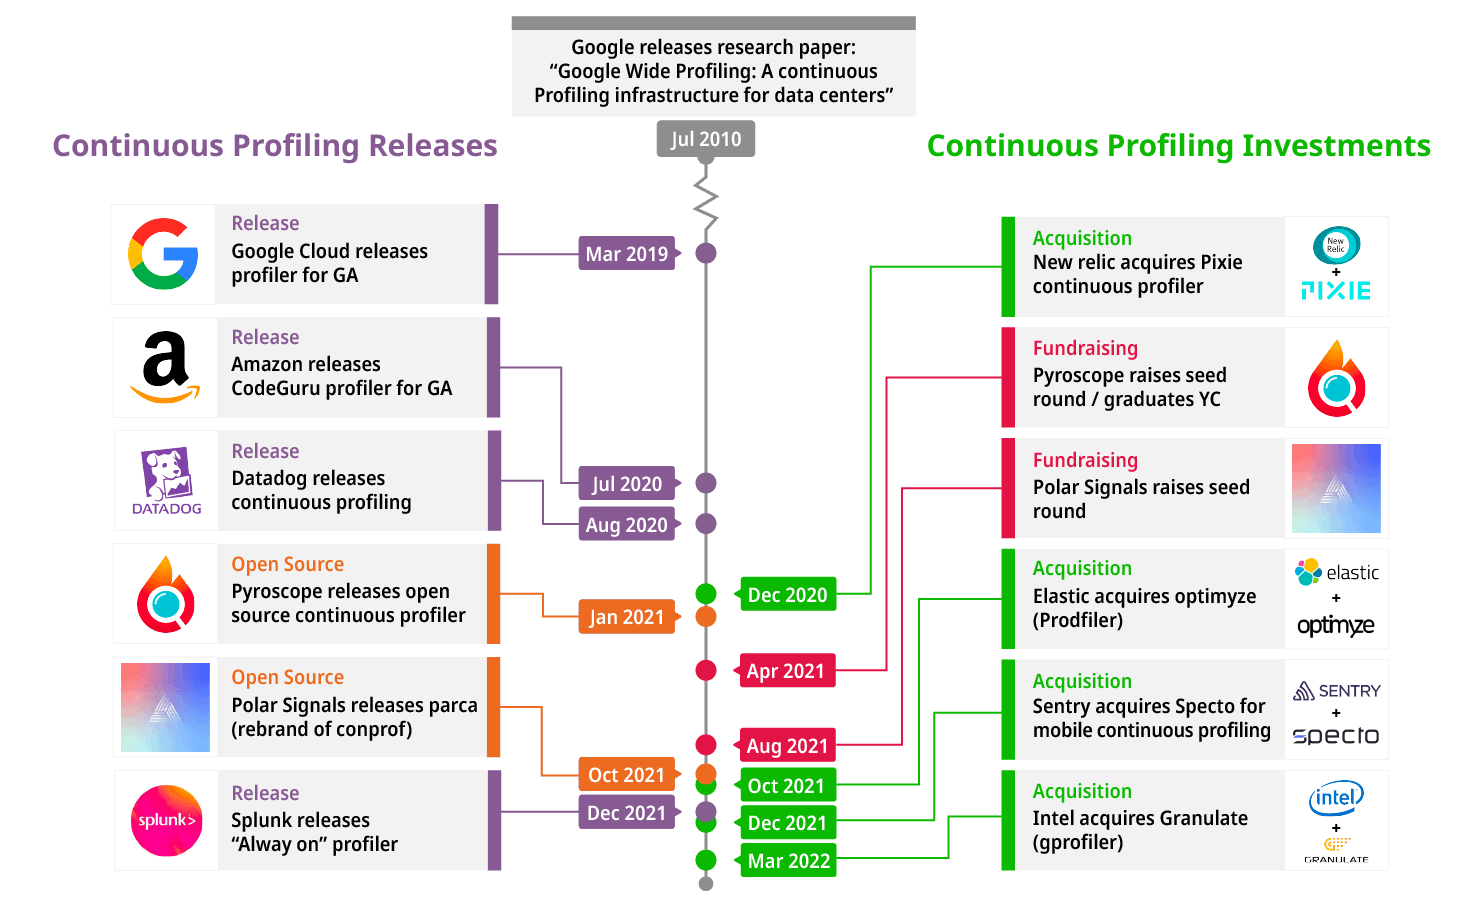 Timeline chart shows continuous profiling trends